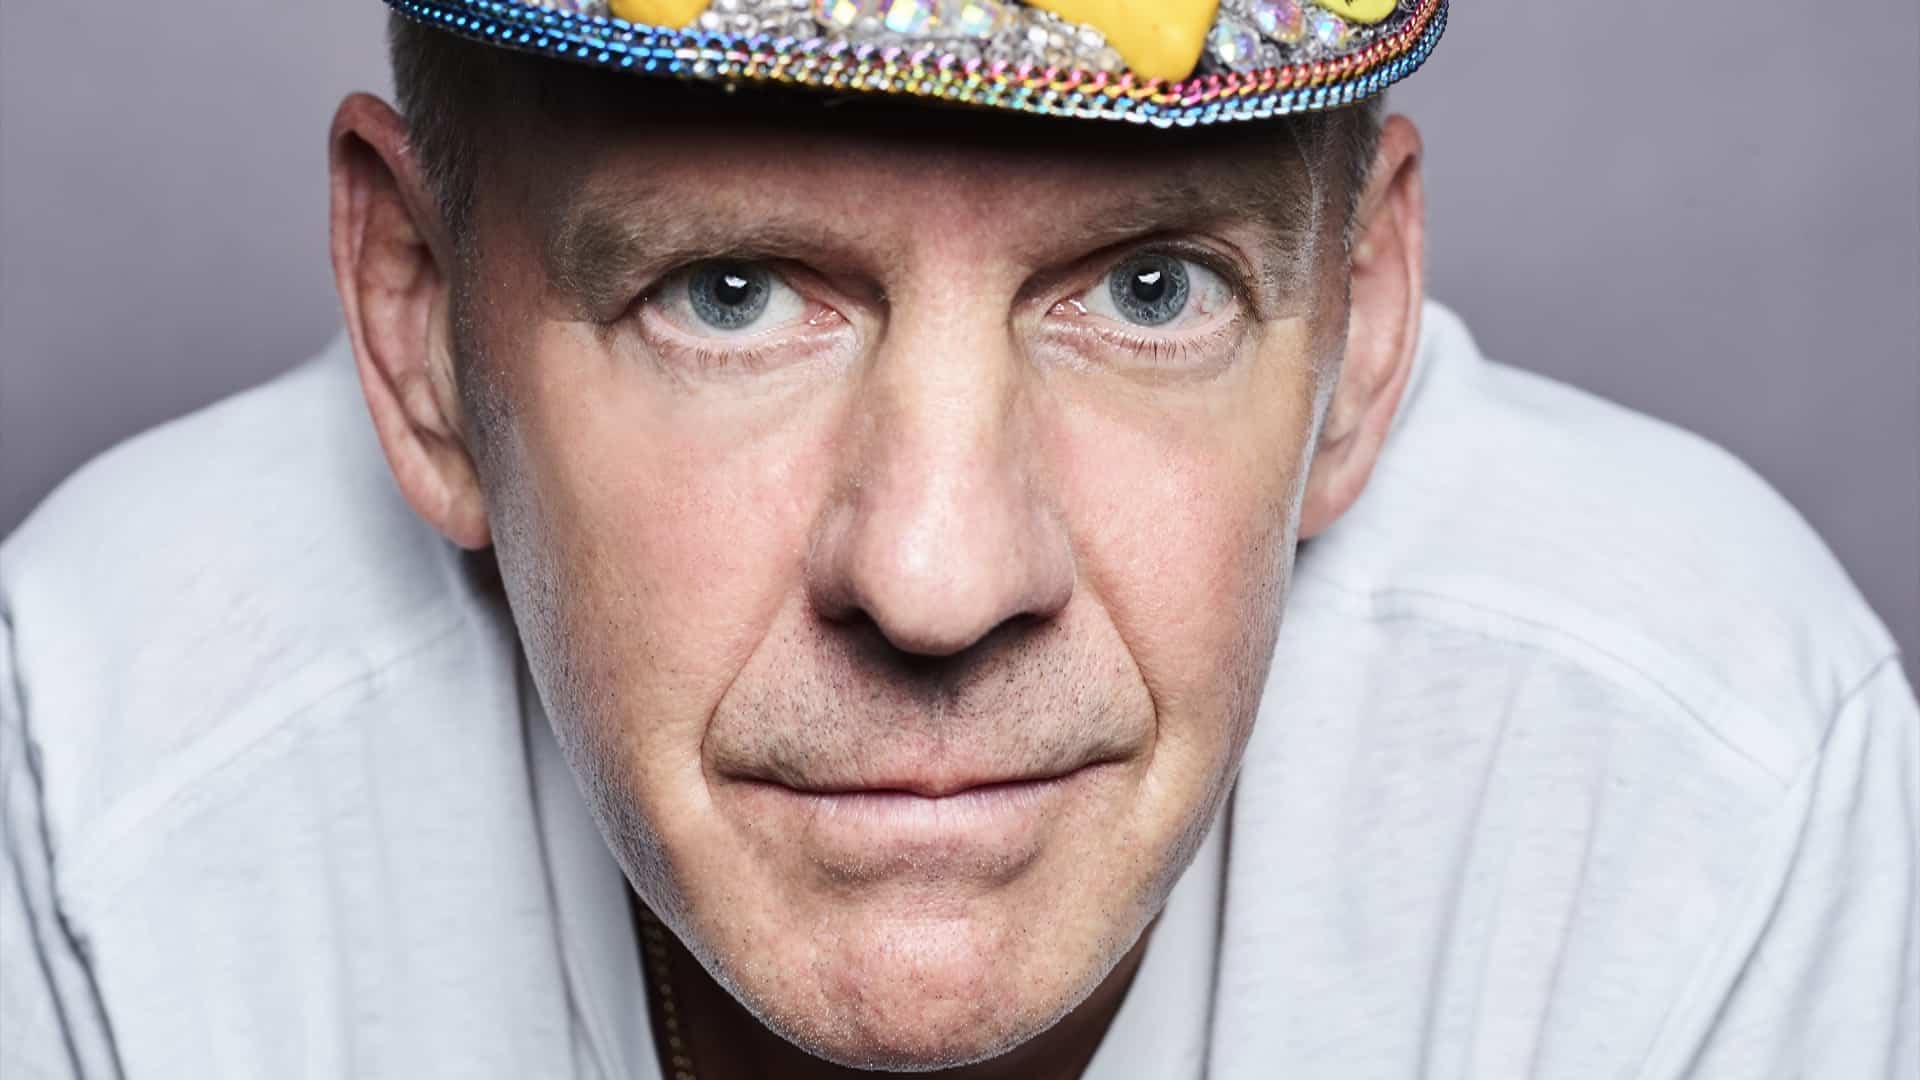 Fatboy Slim talks about the 90s plus scene at Creamfields [Interview]